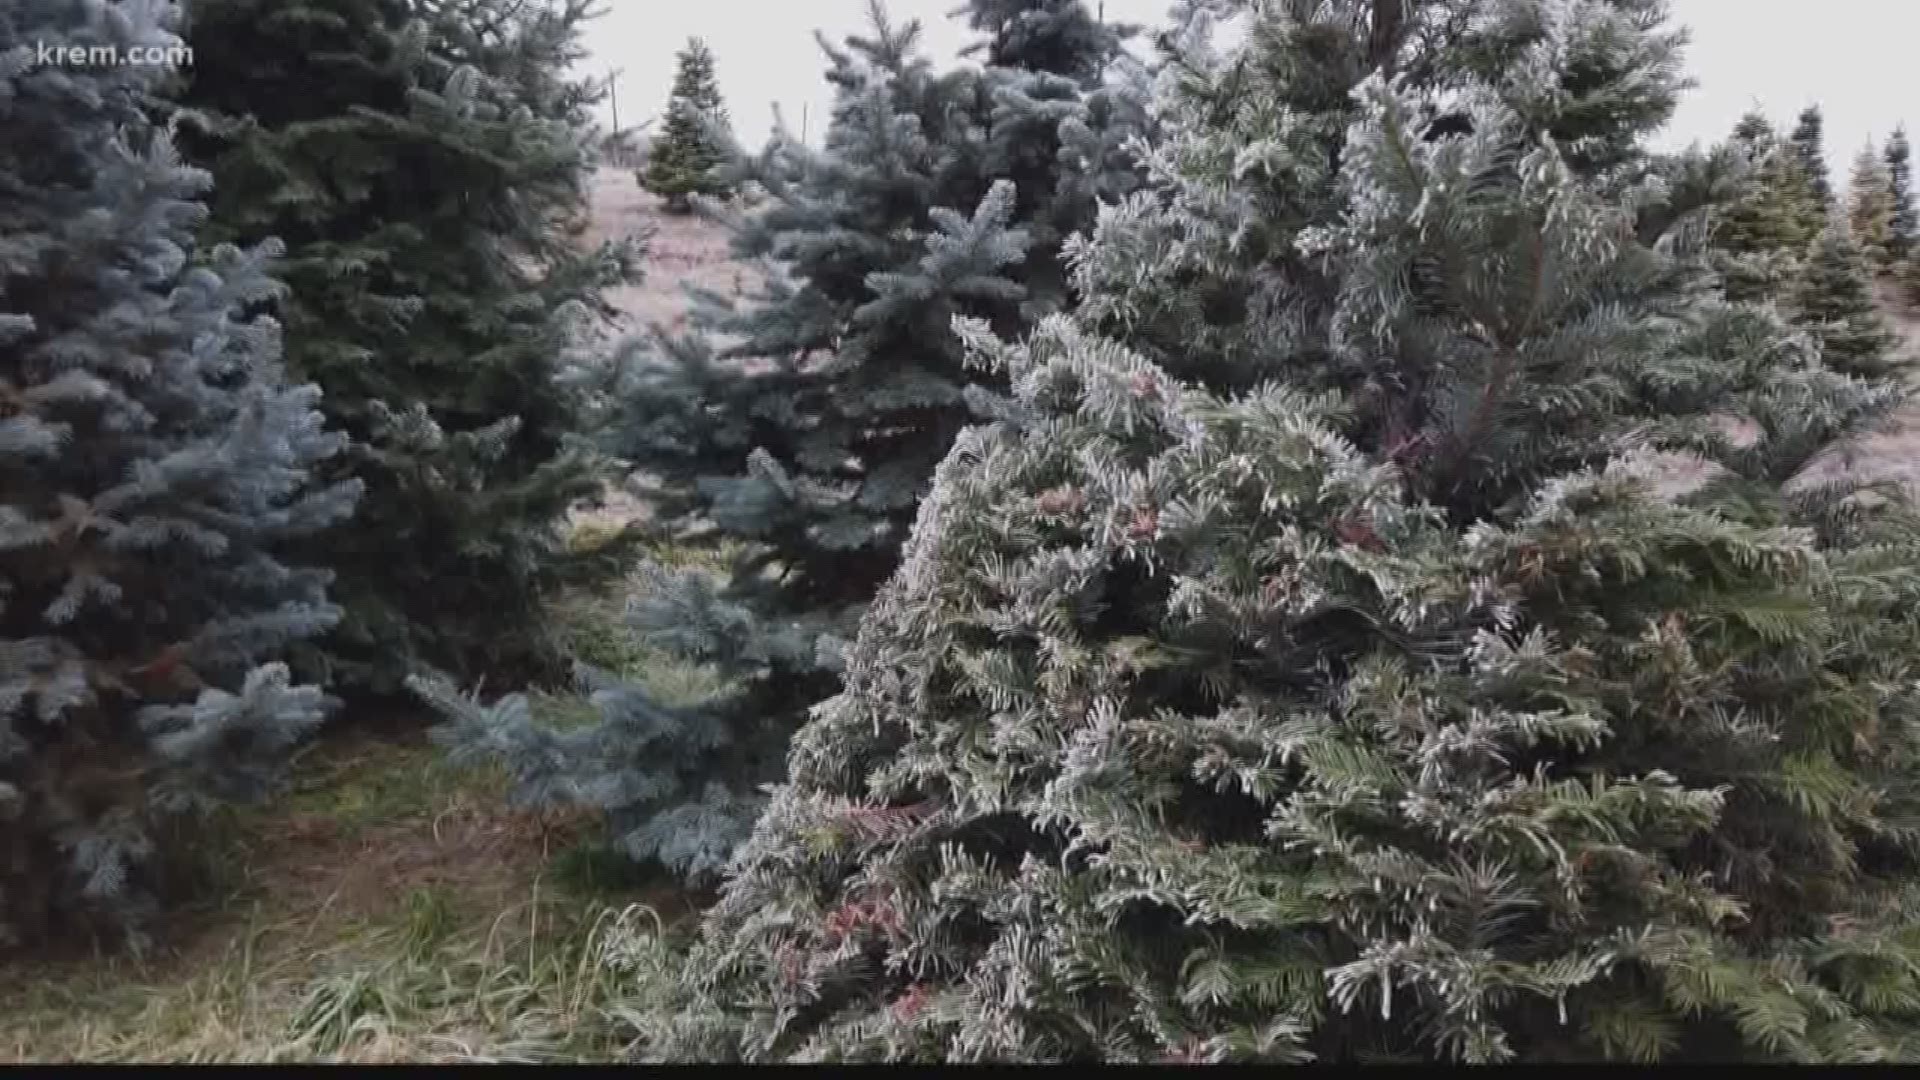 A Christmas tree shortage has led to a smaller supply at a Greenbluff tree farm. A tree farm owner said a lot of trees didn't make it through the summer.